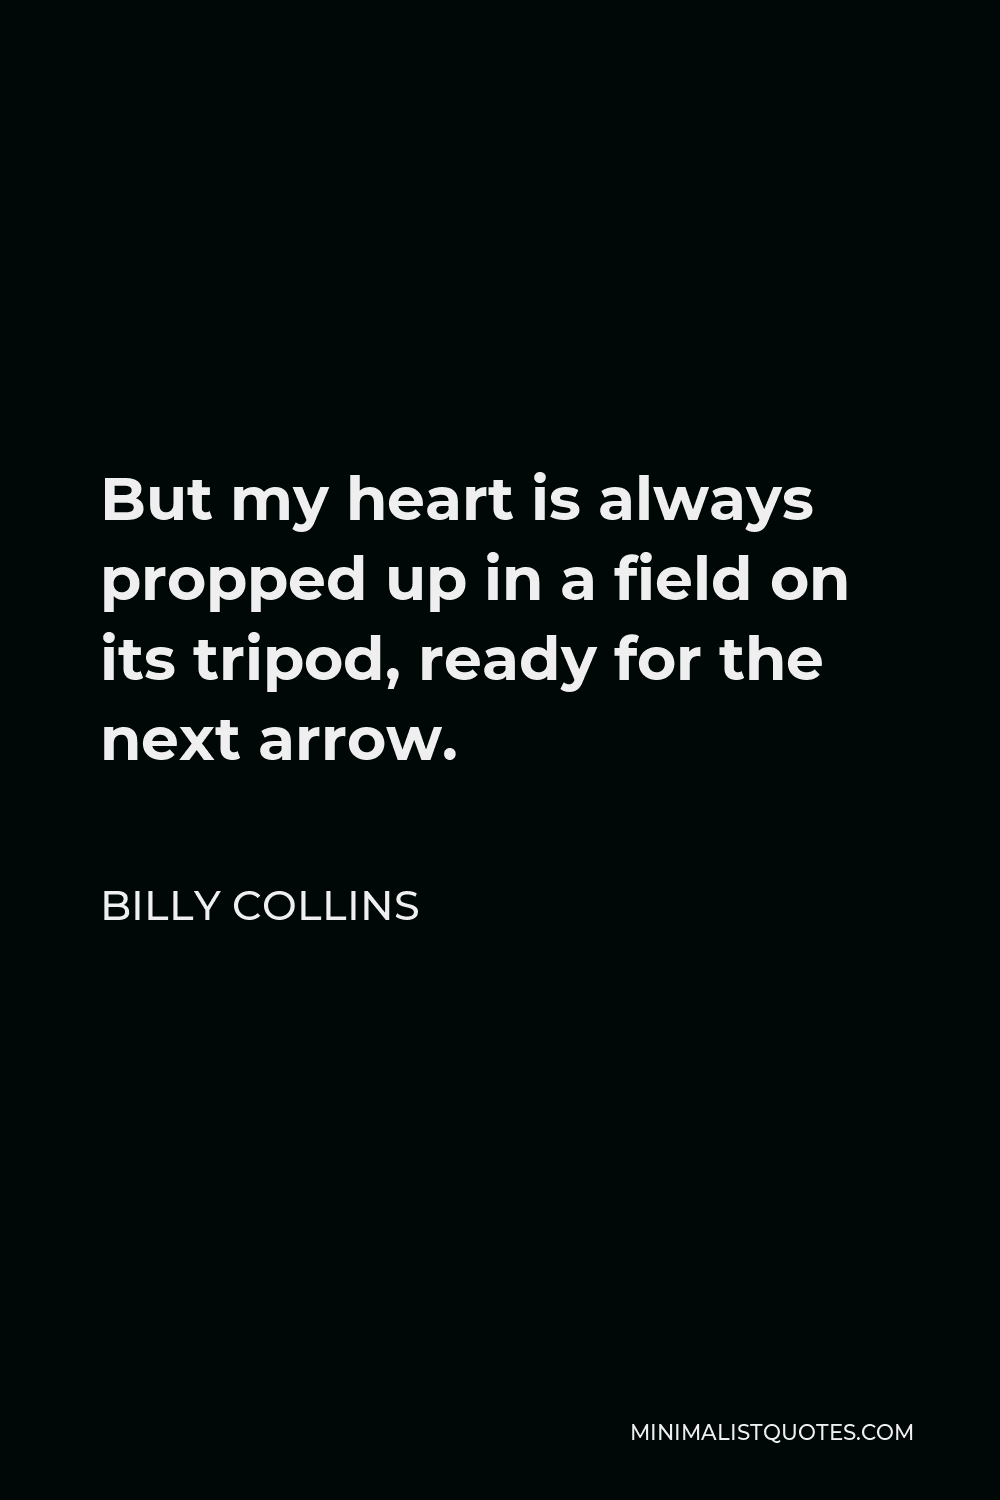 Billy Collins Quote - But my heart is always propped up in a field on its tripod, ready for the next arrow.